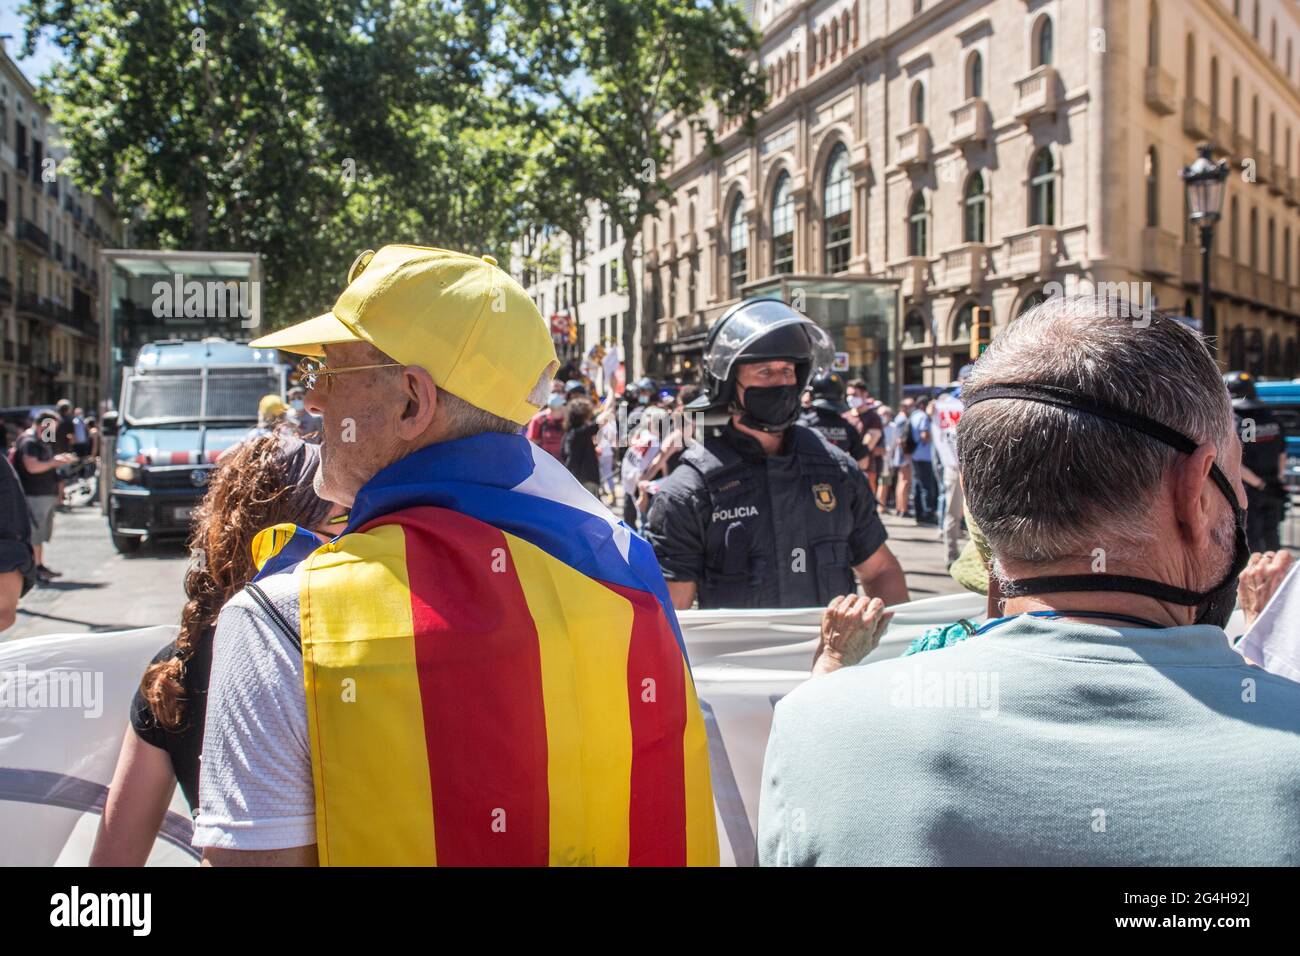 A protester seen with the Catalan independence flag on his back in front of the police during the demonstration.Hundreds of Catalan independentistas have demonstrated in Las Ramblas in Barcelona, in front of the Gran Teatre del Liceu (Great Theater of the Lyceum), shielded by many policemen, to protest the visit of the President of the Spanish Government, Pedro Sanchez, who has held a conference entitled 'Reunion: a project for the future for all of Spain', with the expectation of an imminent granting of pardons for the independence leaders in prison. The protesters protested to denounce that Stock Photo